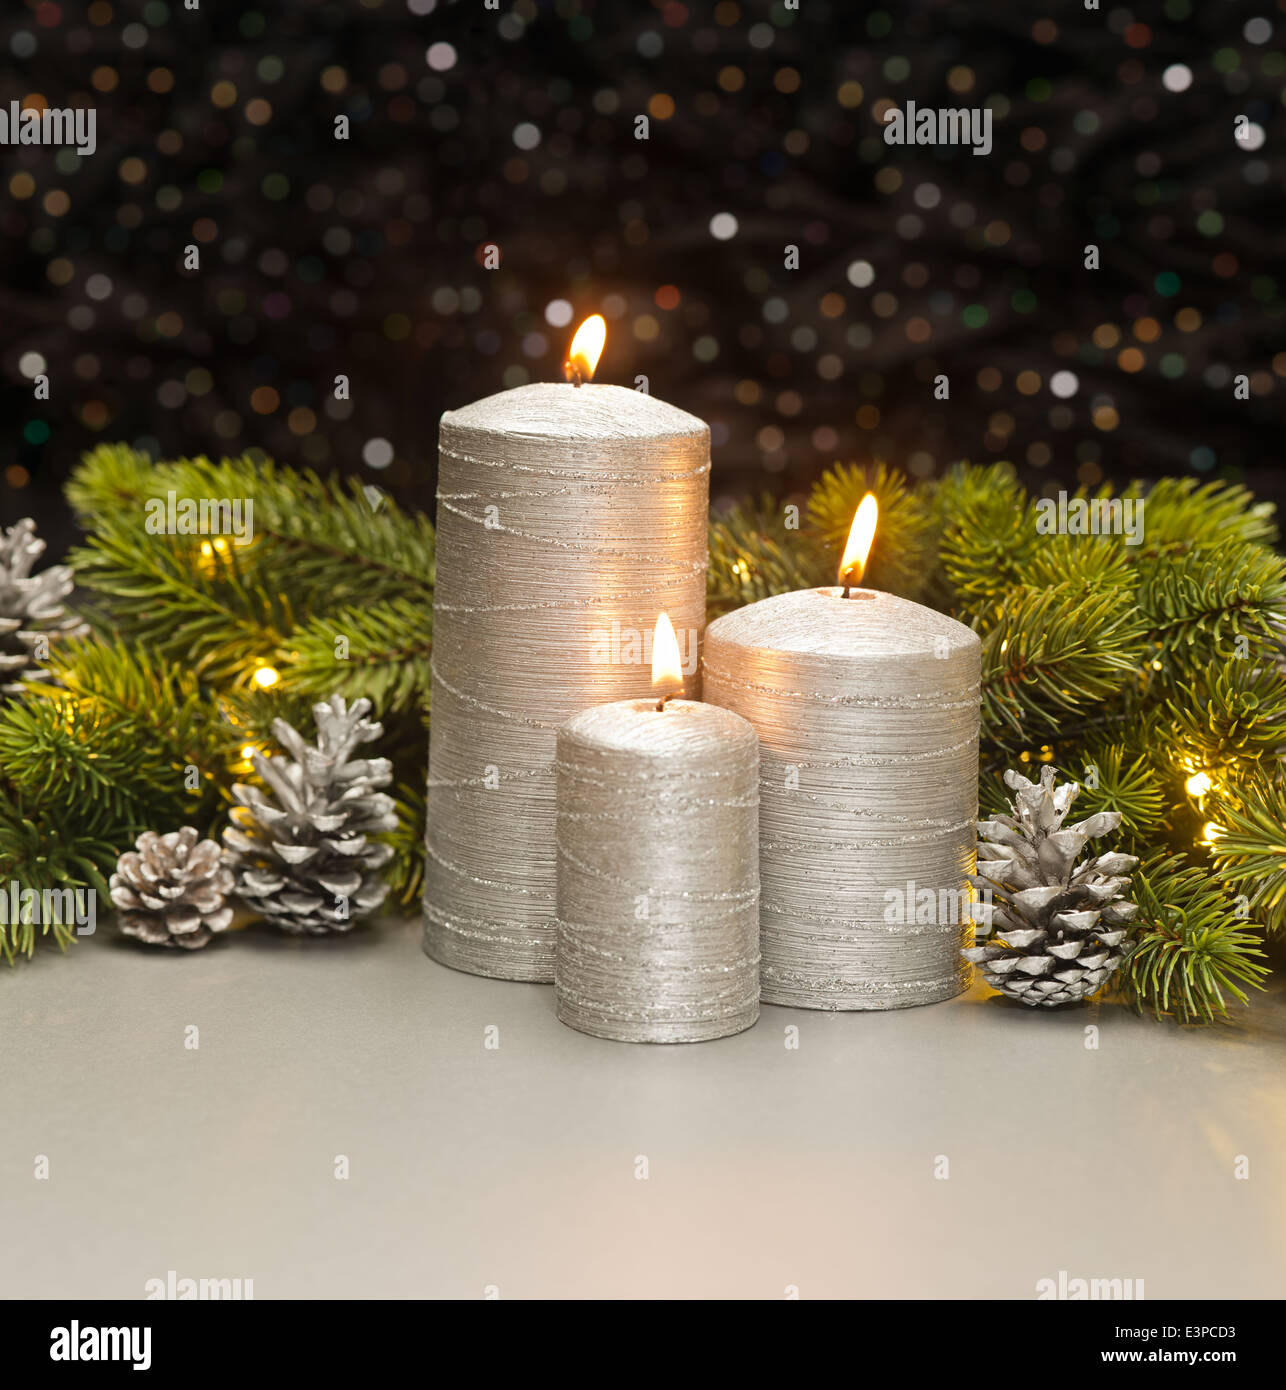 Three Silver Candles with Christmas tree branches and pine cones decorated Stock Photo